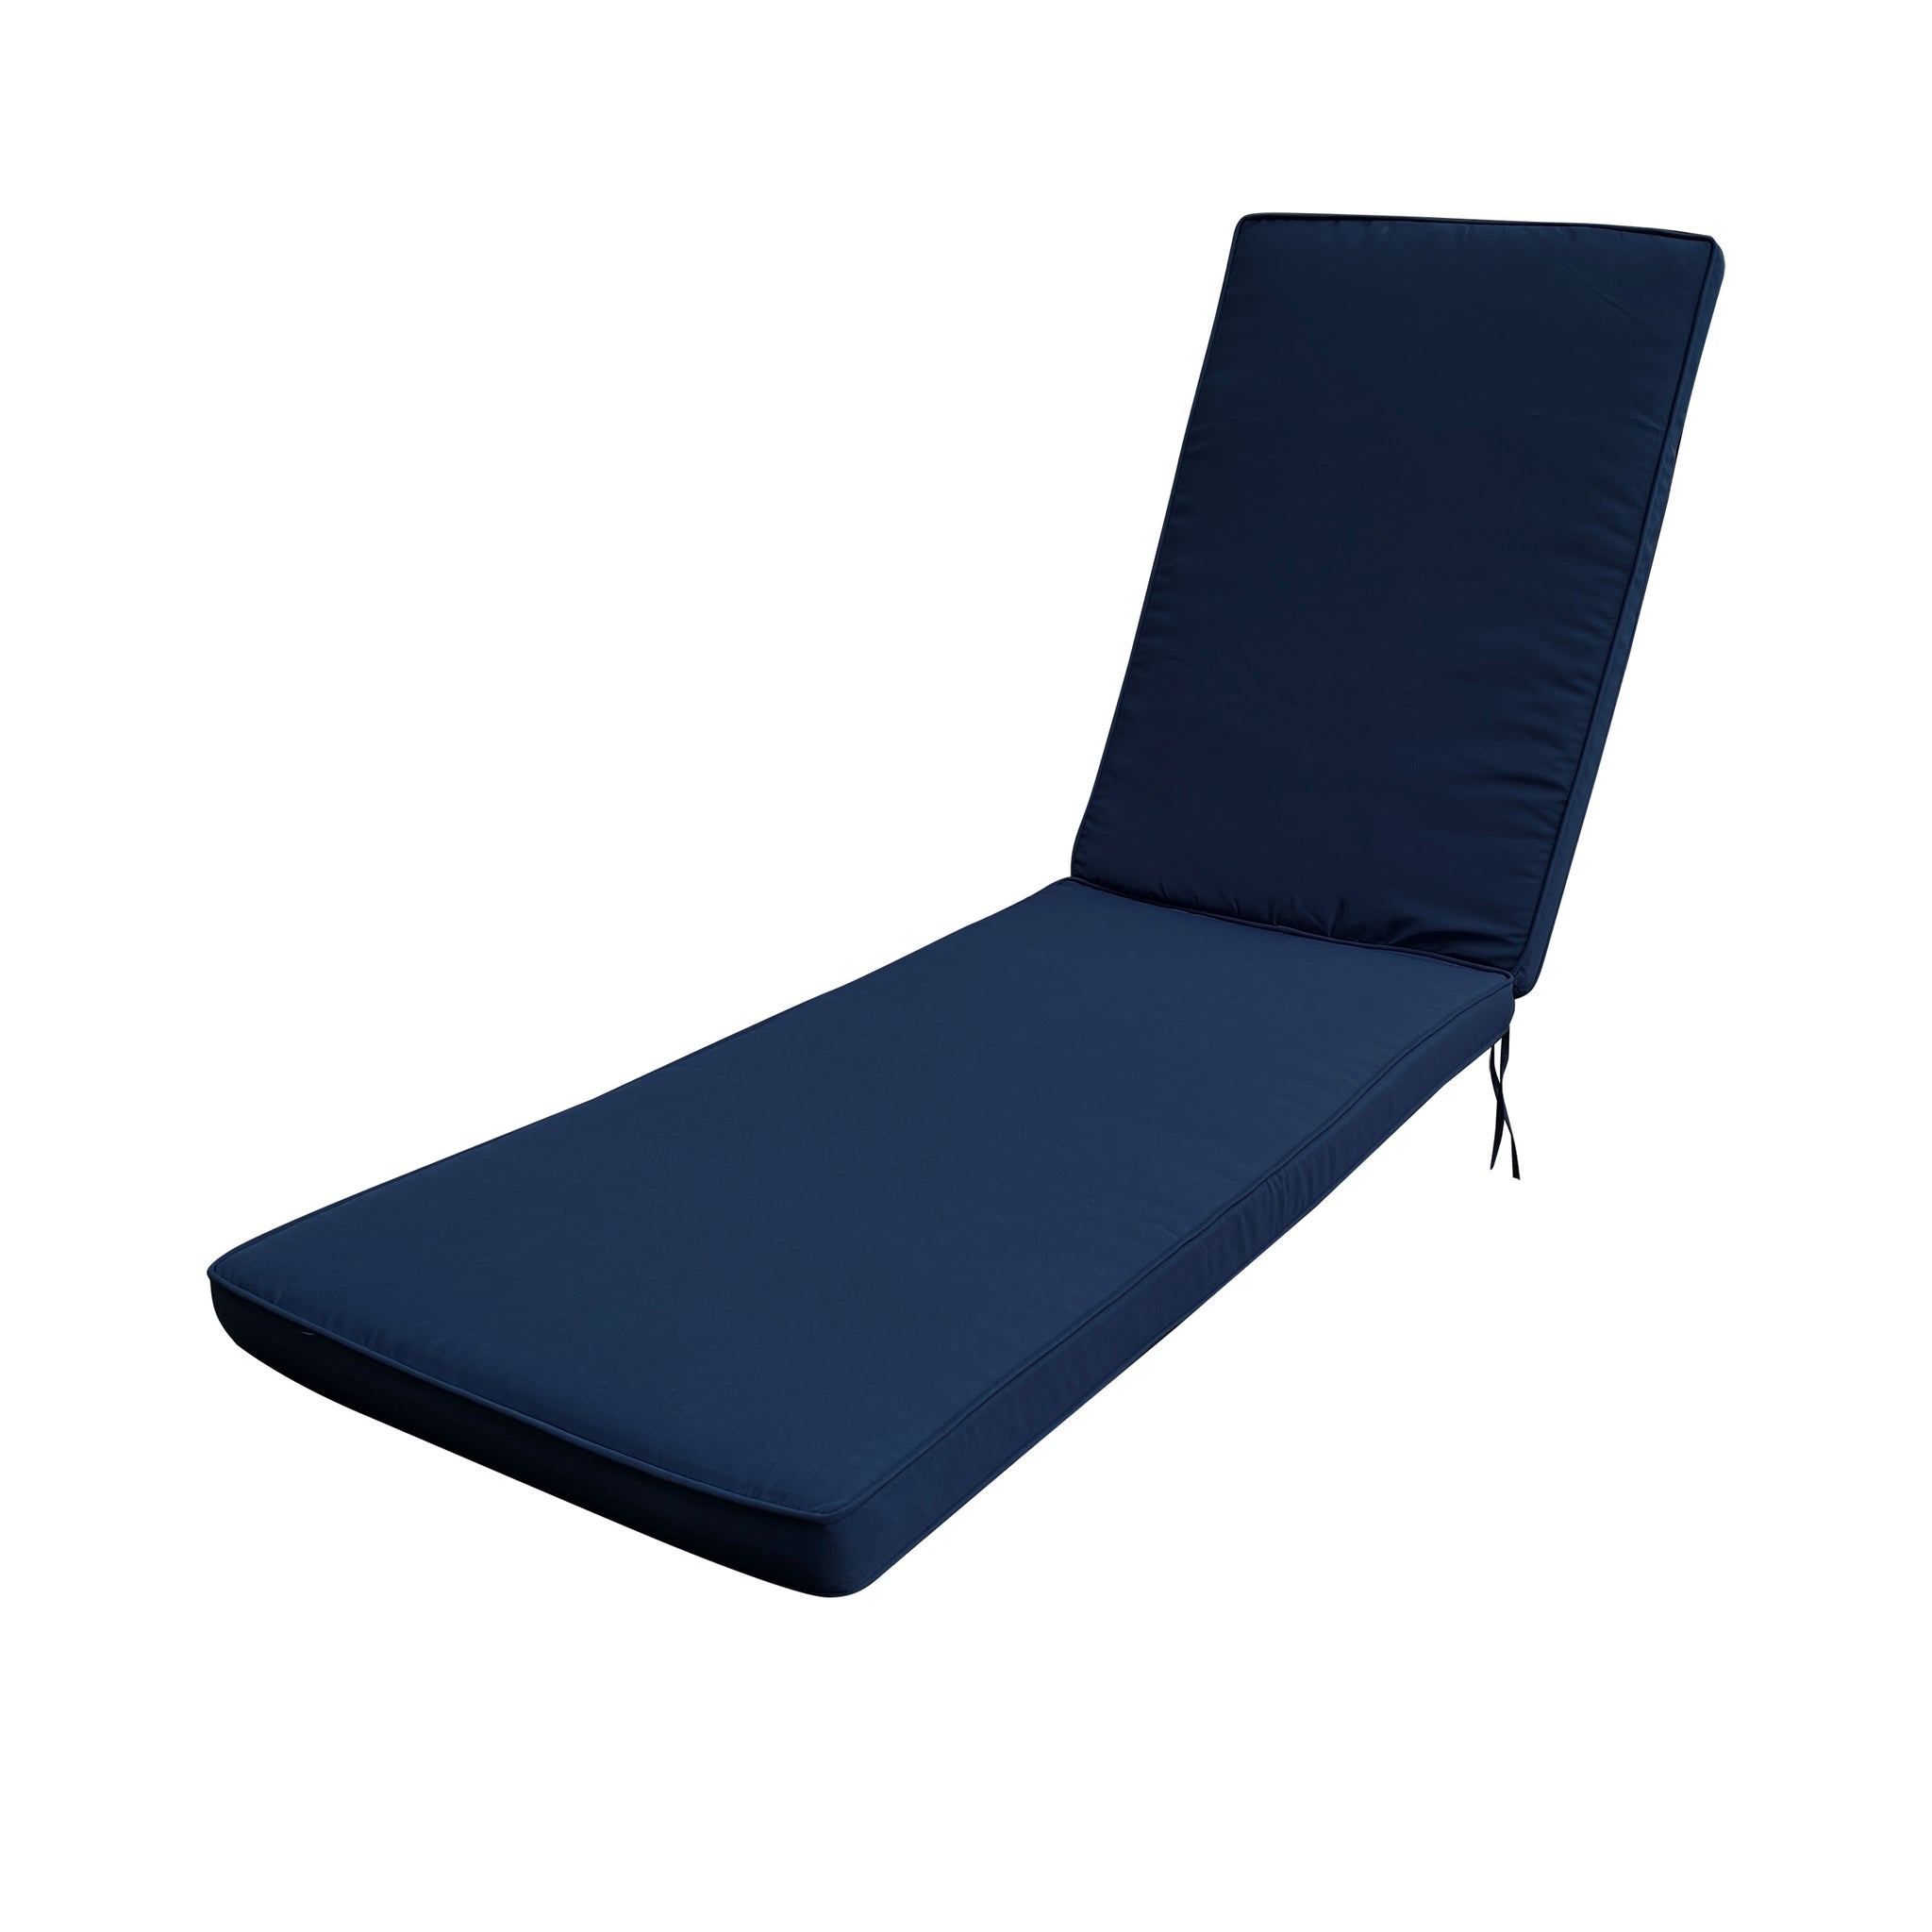 1pcs Outdoor Lounge Chair Cushion Replacement